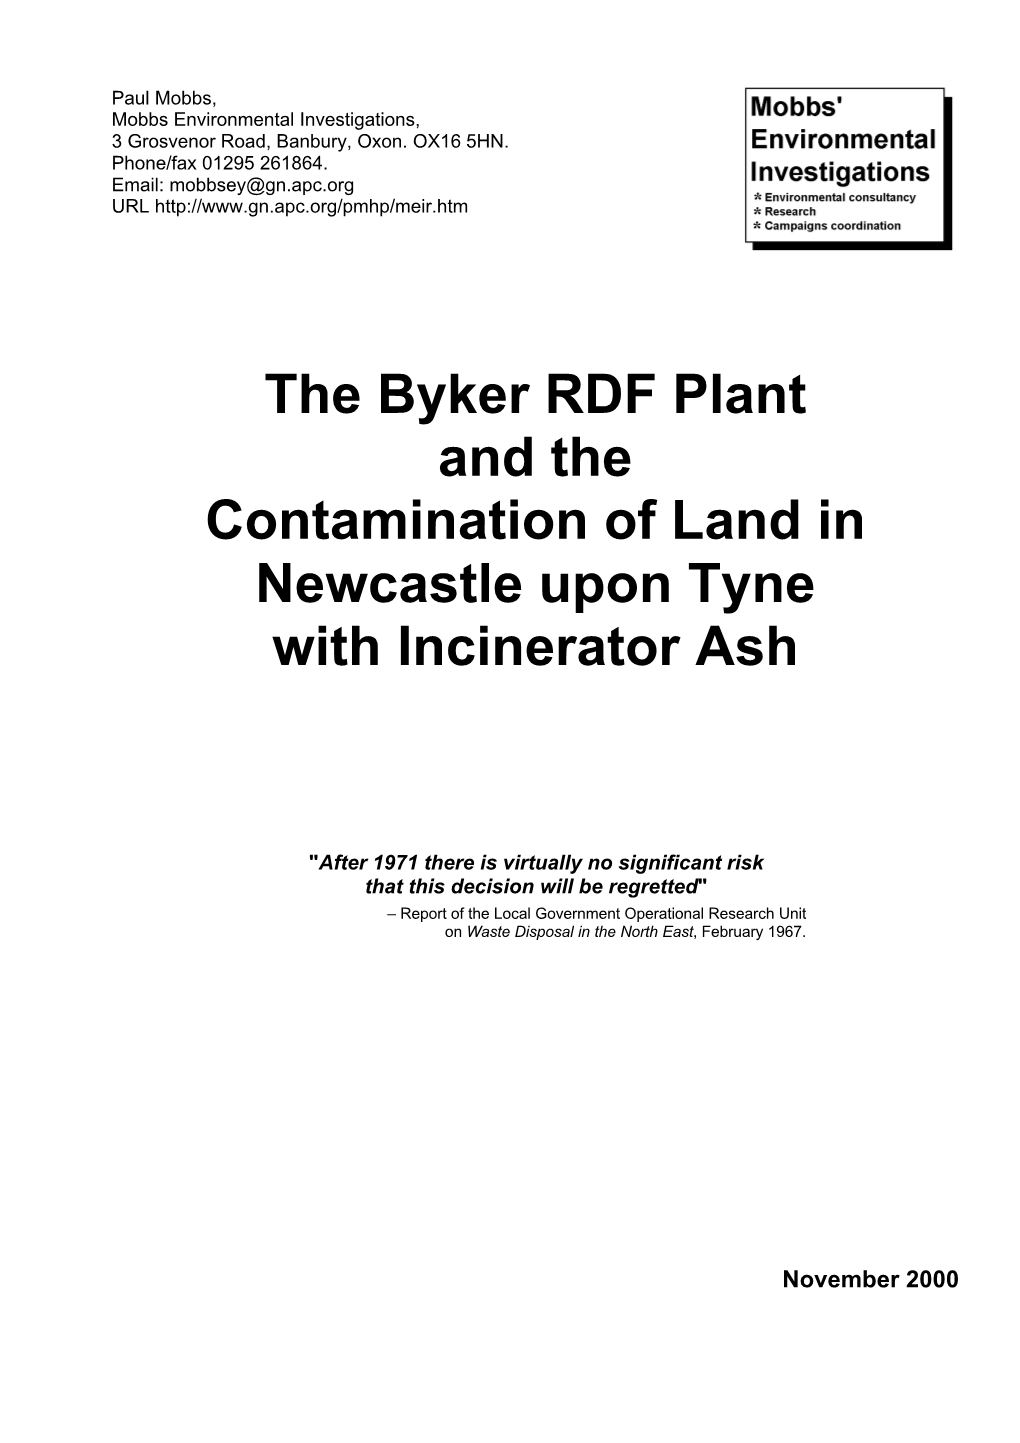 The Byker RDF Plant and the Contamination of Land in Newcastle Upon Tyne with Incinerator Ash